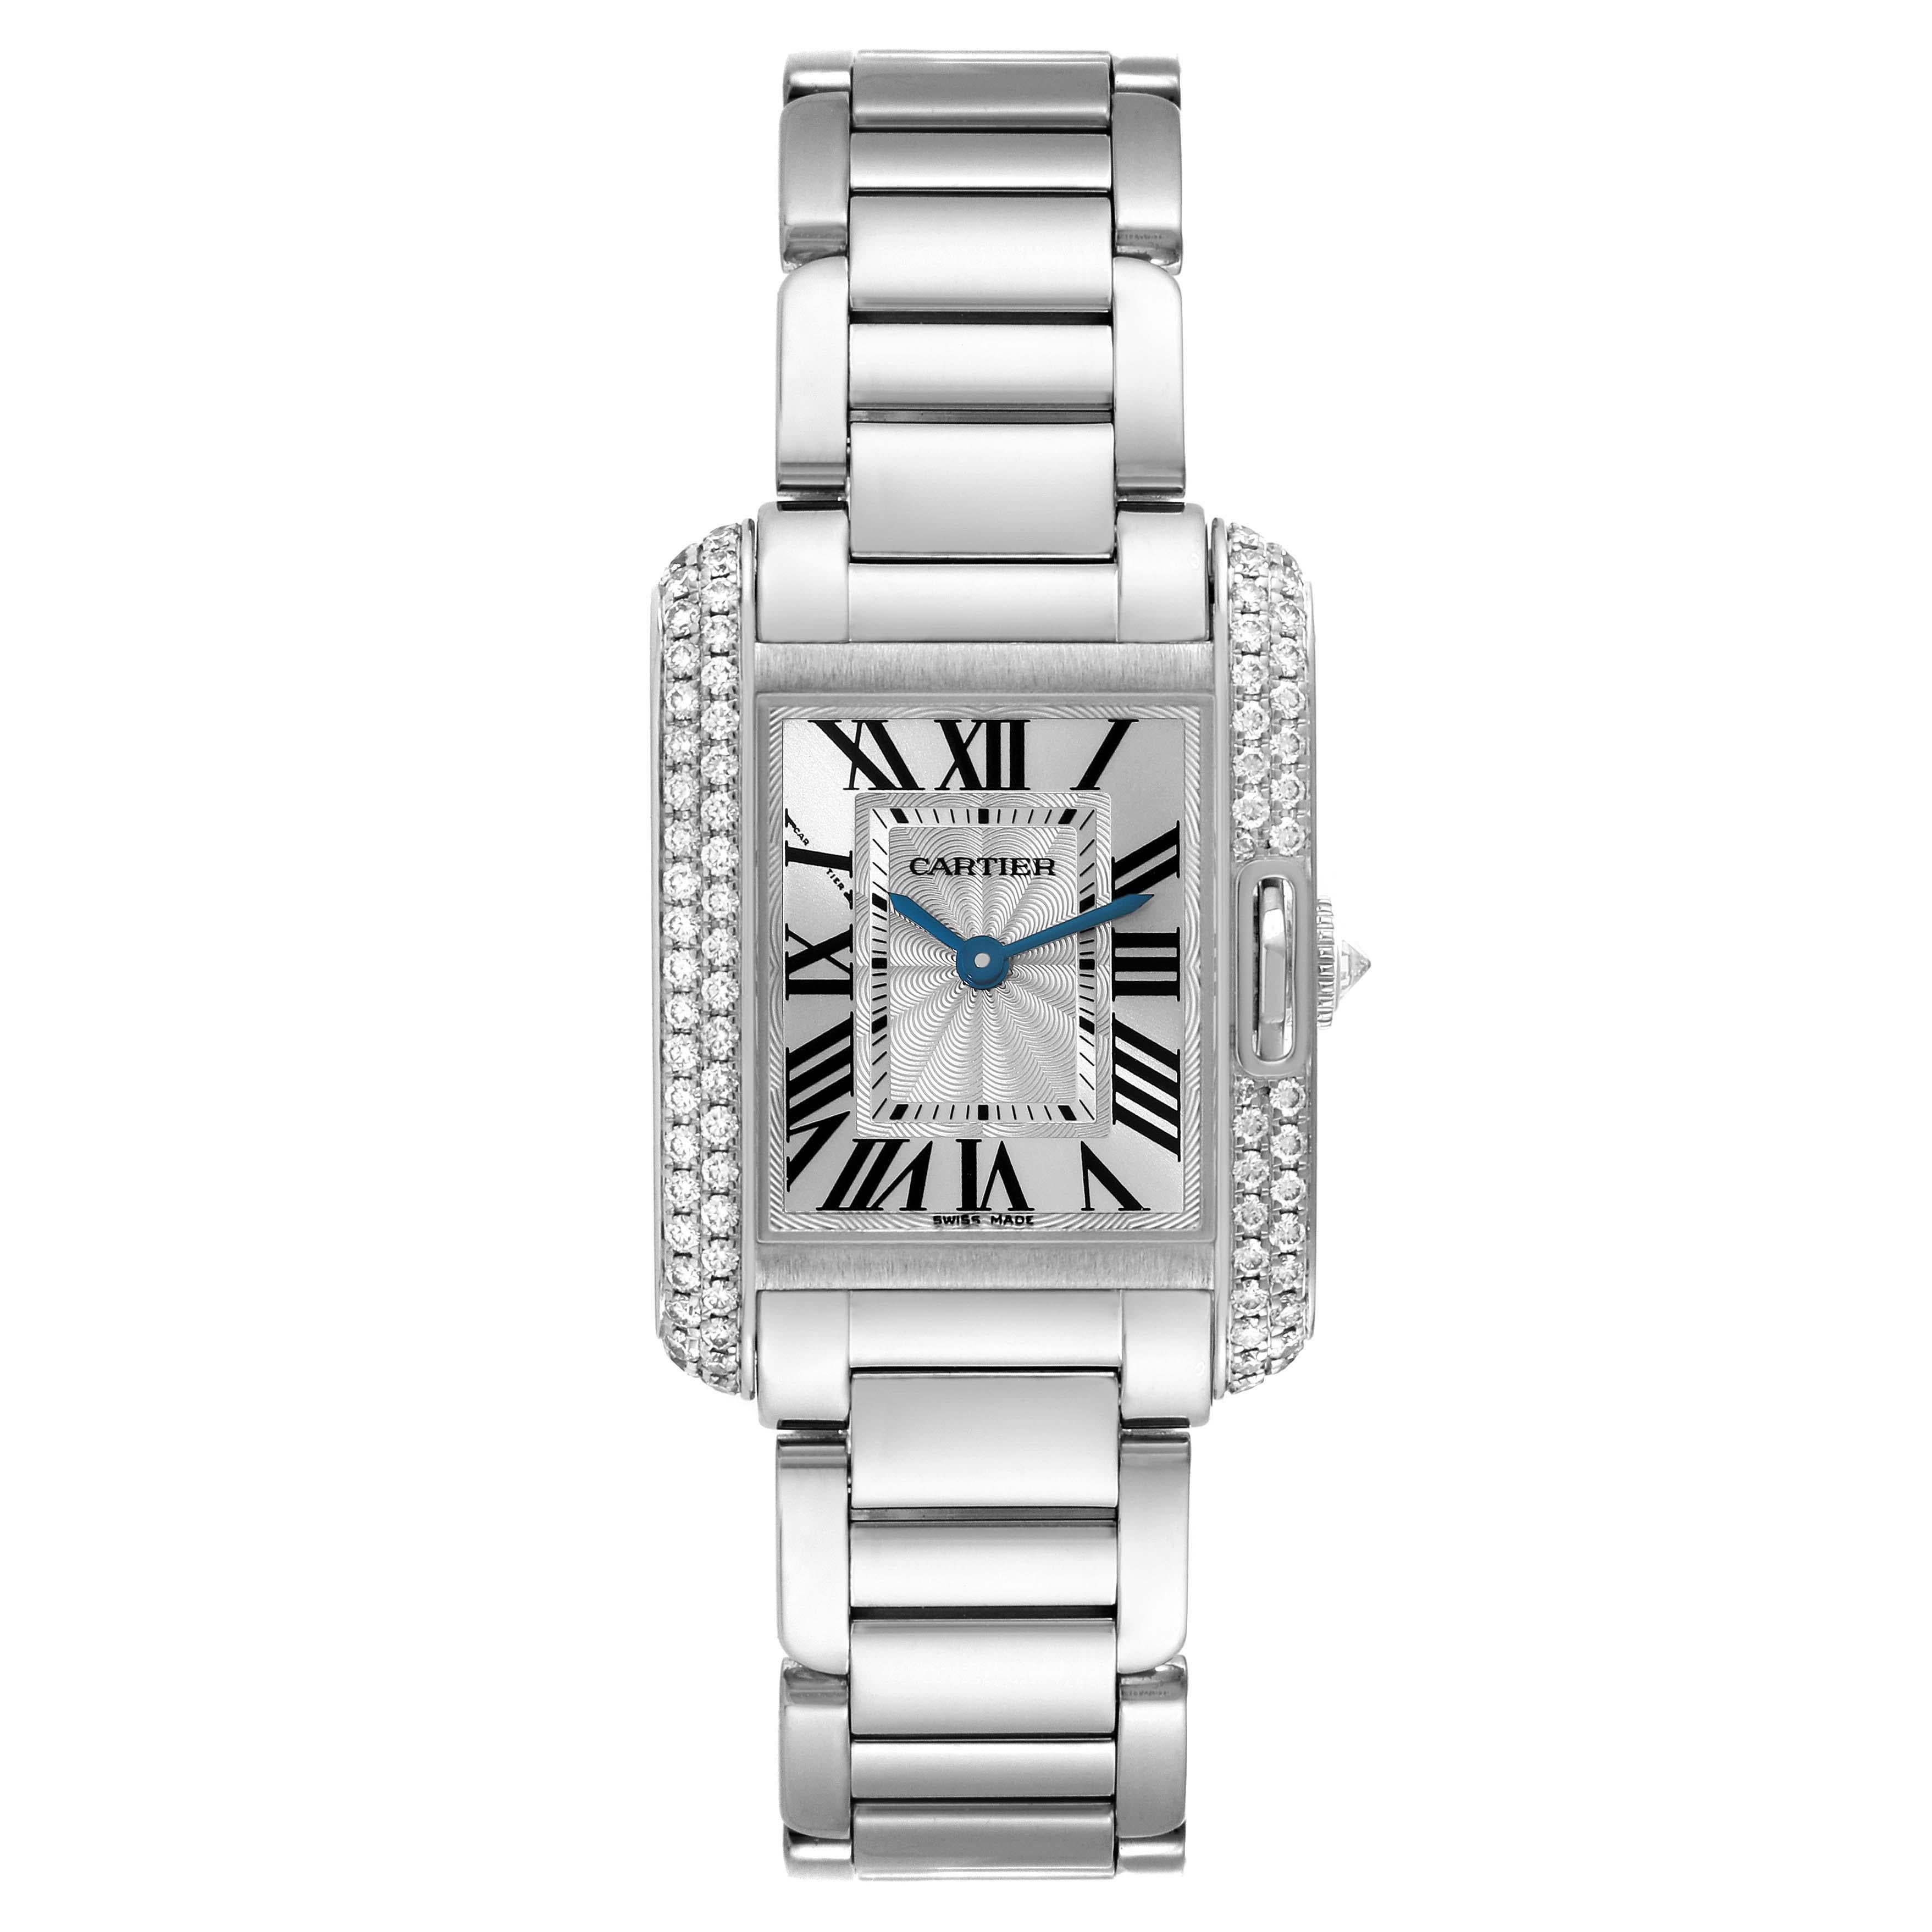 Cartier Tank Anglaise White Gold Diamond Ladies Watch WT100008 In Excellent Condition For Sale In Atlanta, GA